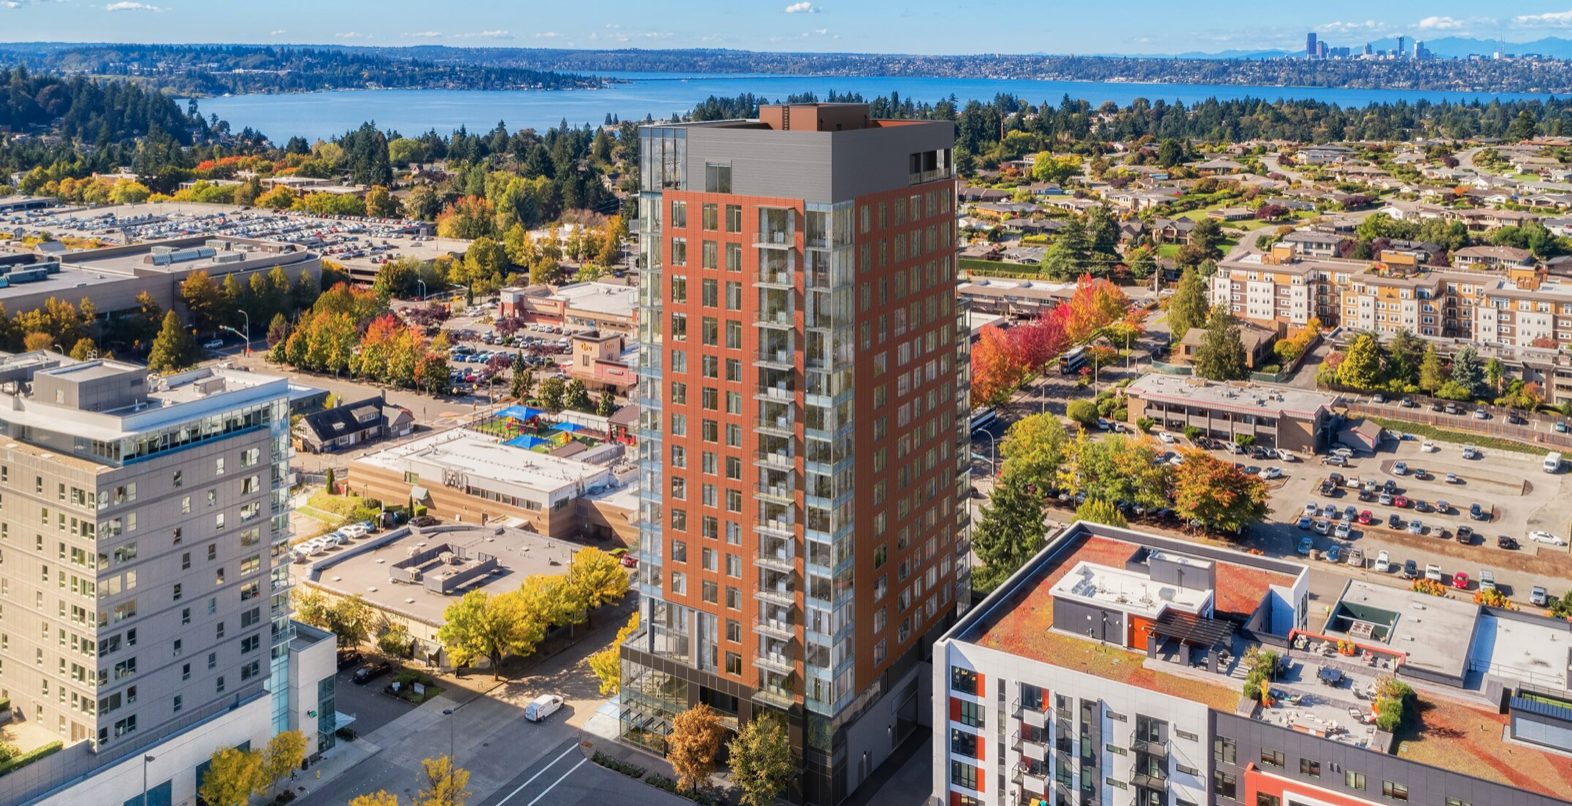 20-Story High Rise Condo Building Now Under Construction in Downtown Bellevue